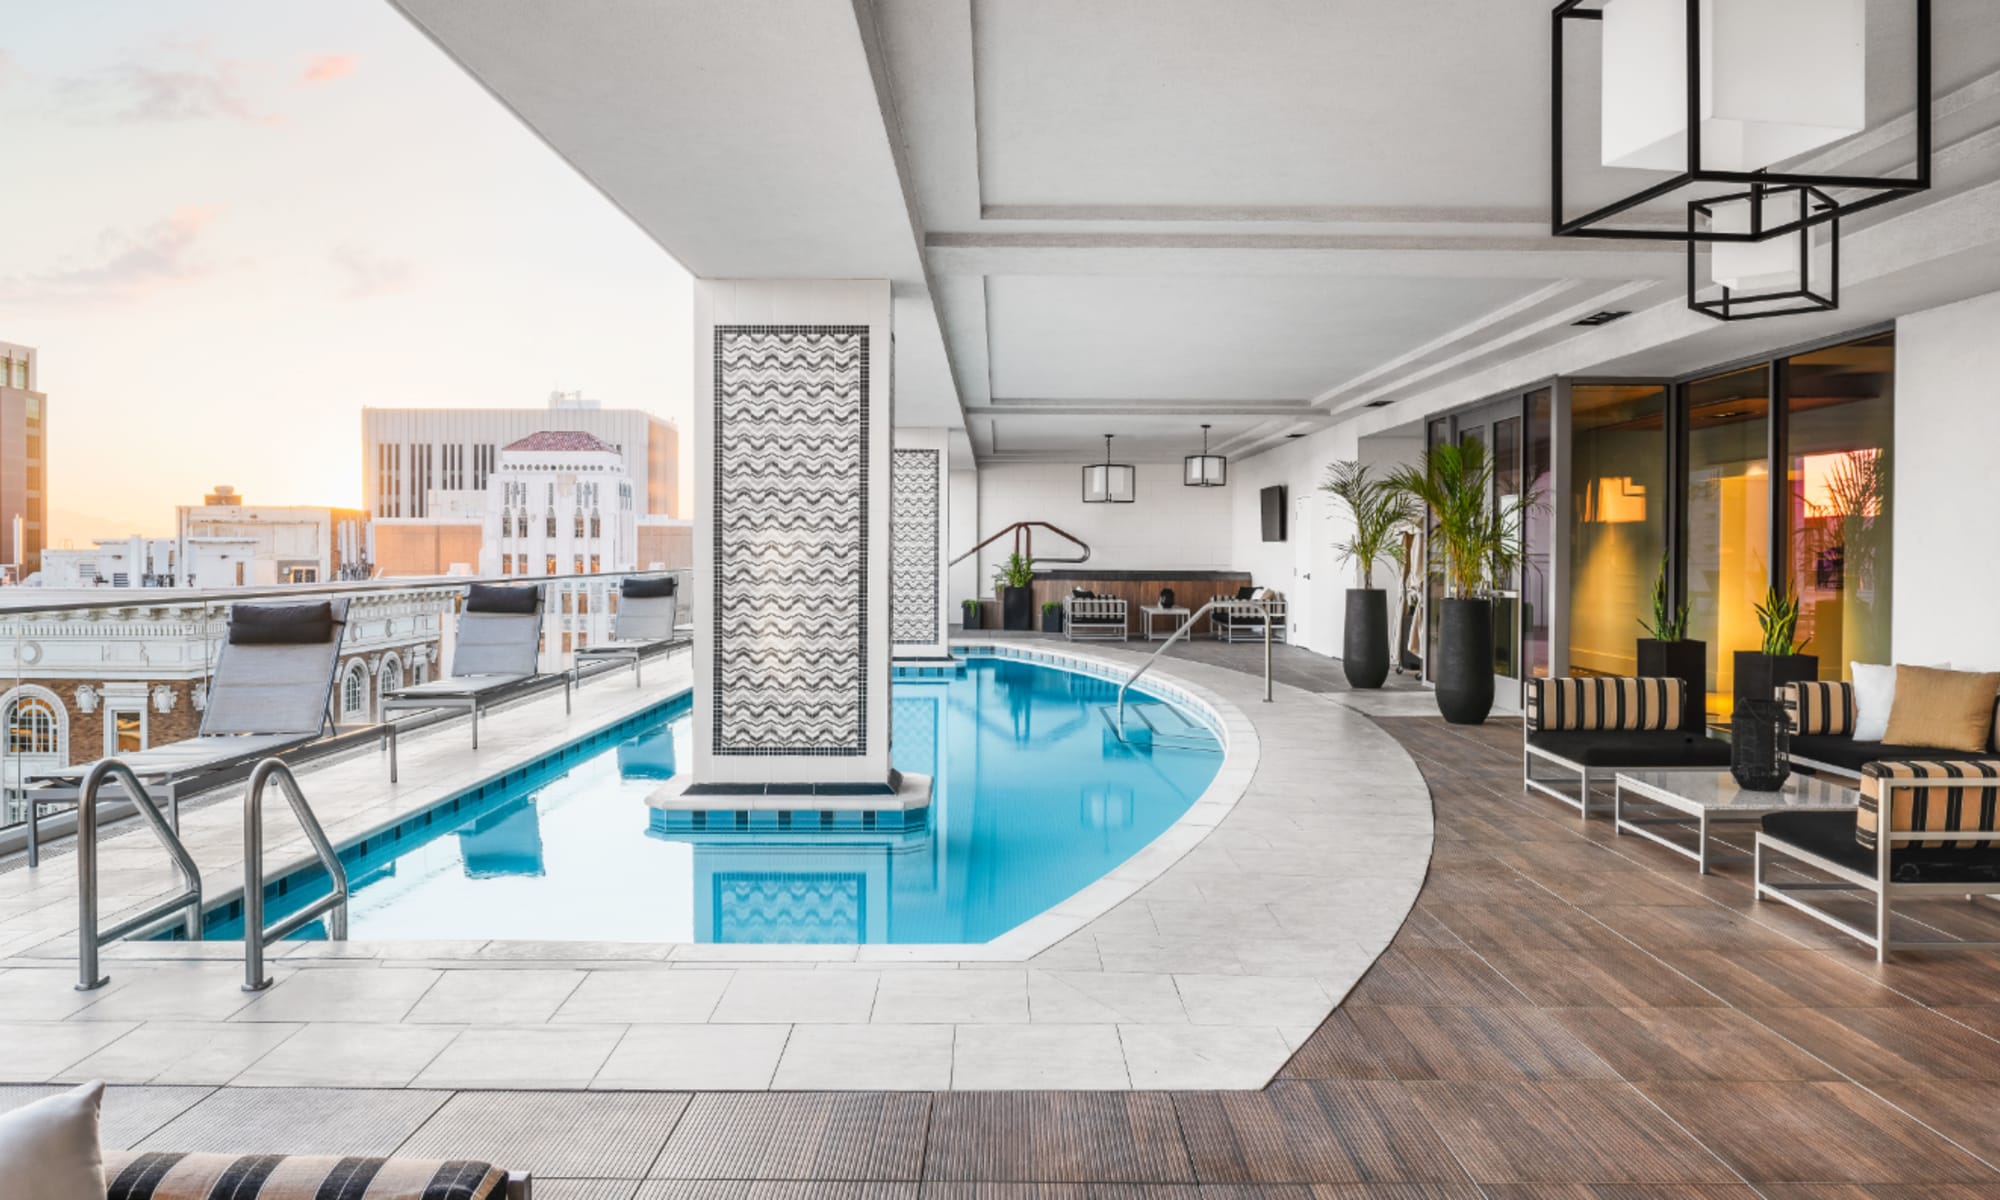 Enjoy Apartments with a Swimming Pool at CityScape Residences in Phoenix, Arizona